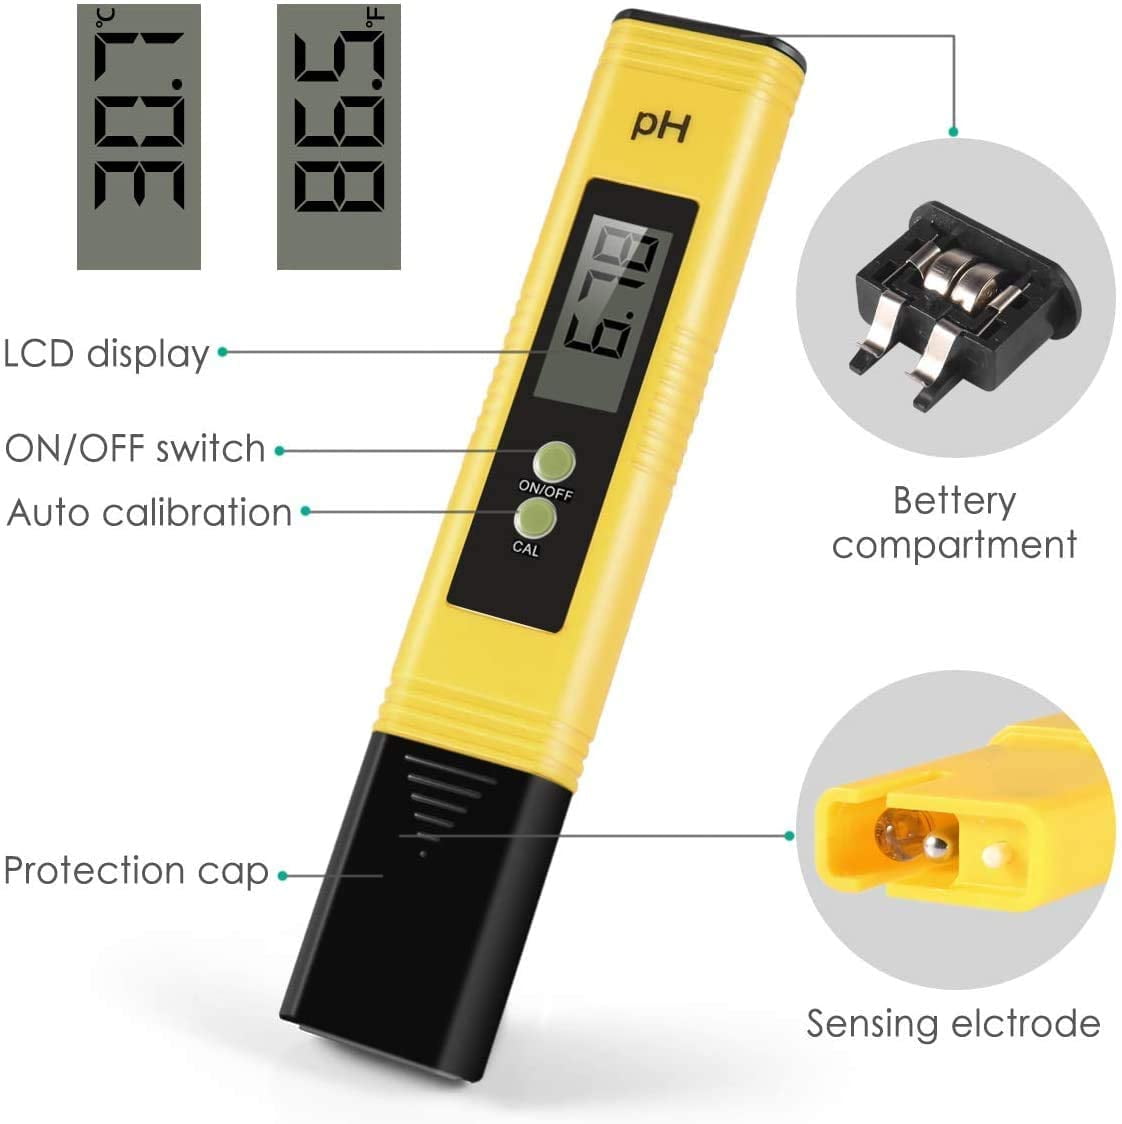 Digital PH Meter Water Quality Tester with Calibration Solution Powder PH Accuracy 0.01 Measurement for 0-14 Measurement Range for Household Drinking,Food Brewing,Hydroponics,Aquariums,Pools,Spa,Lab 